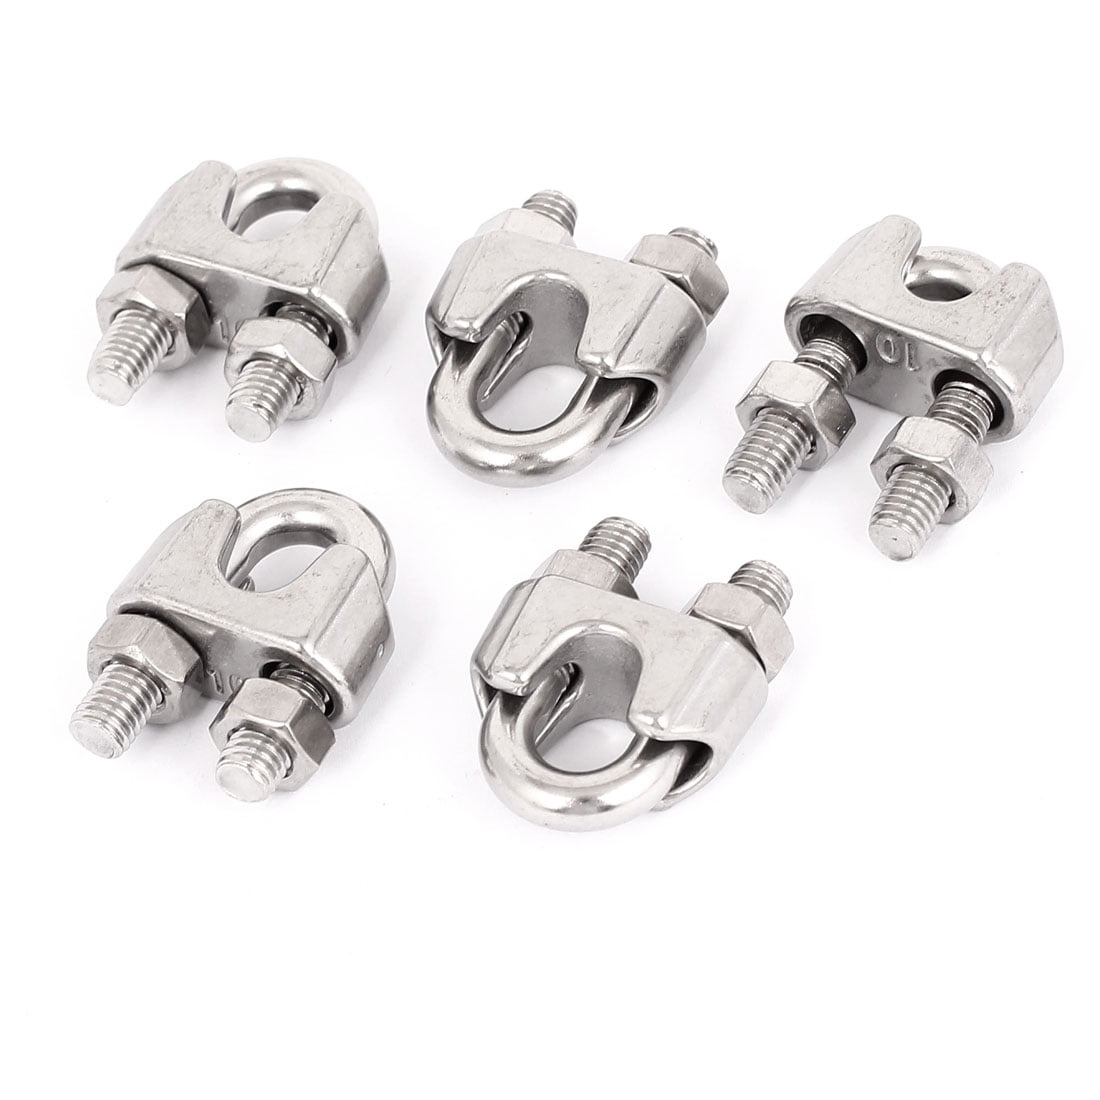 Unique Bargains 10mm 3/8" Stainless Steel Wire Rope Cable Clamp Clips 5pcs